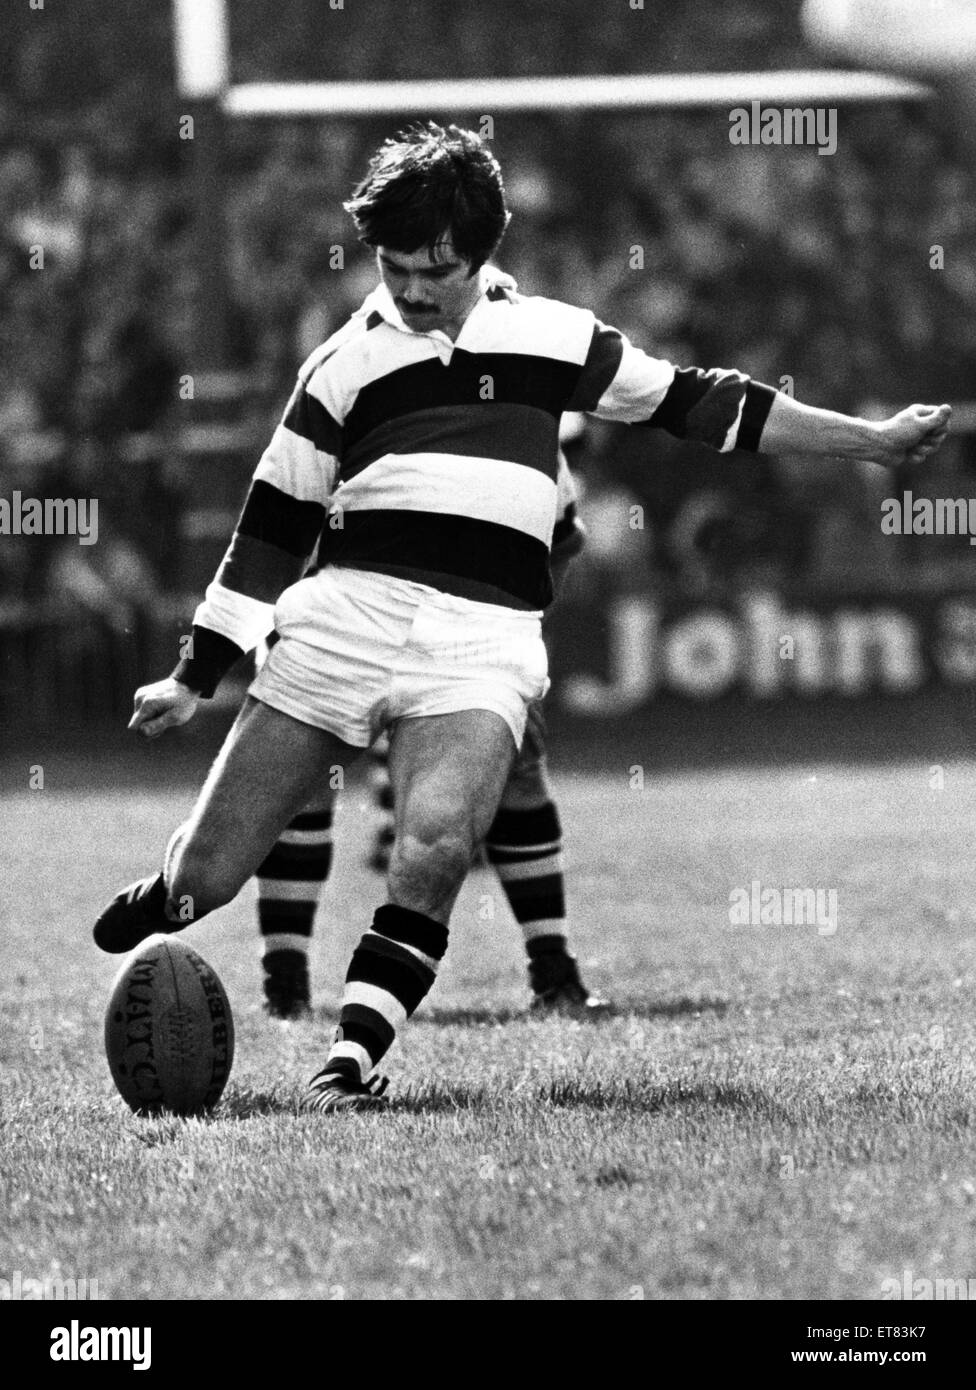 Welsh Rugby Union Final - Pontypool 18 - 6 Swansea. Another three points for Pontypool full back Peter Lewis. 30th April 1983. Stock Photo